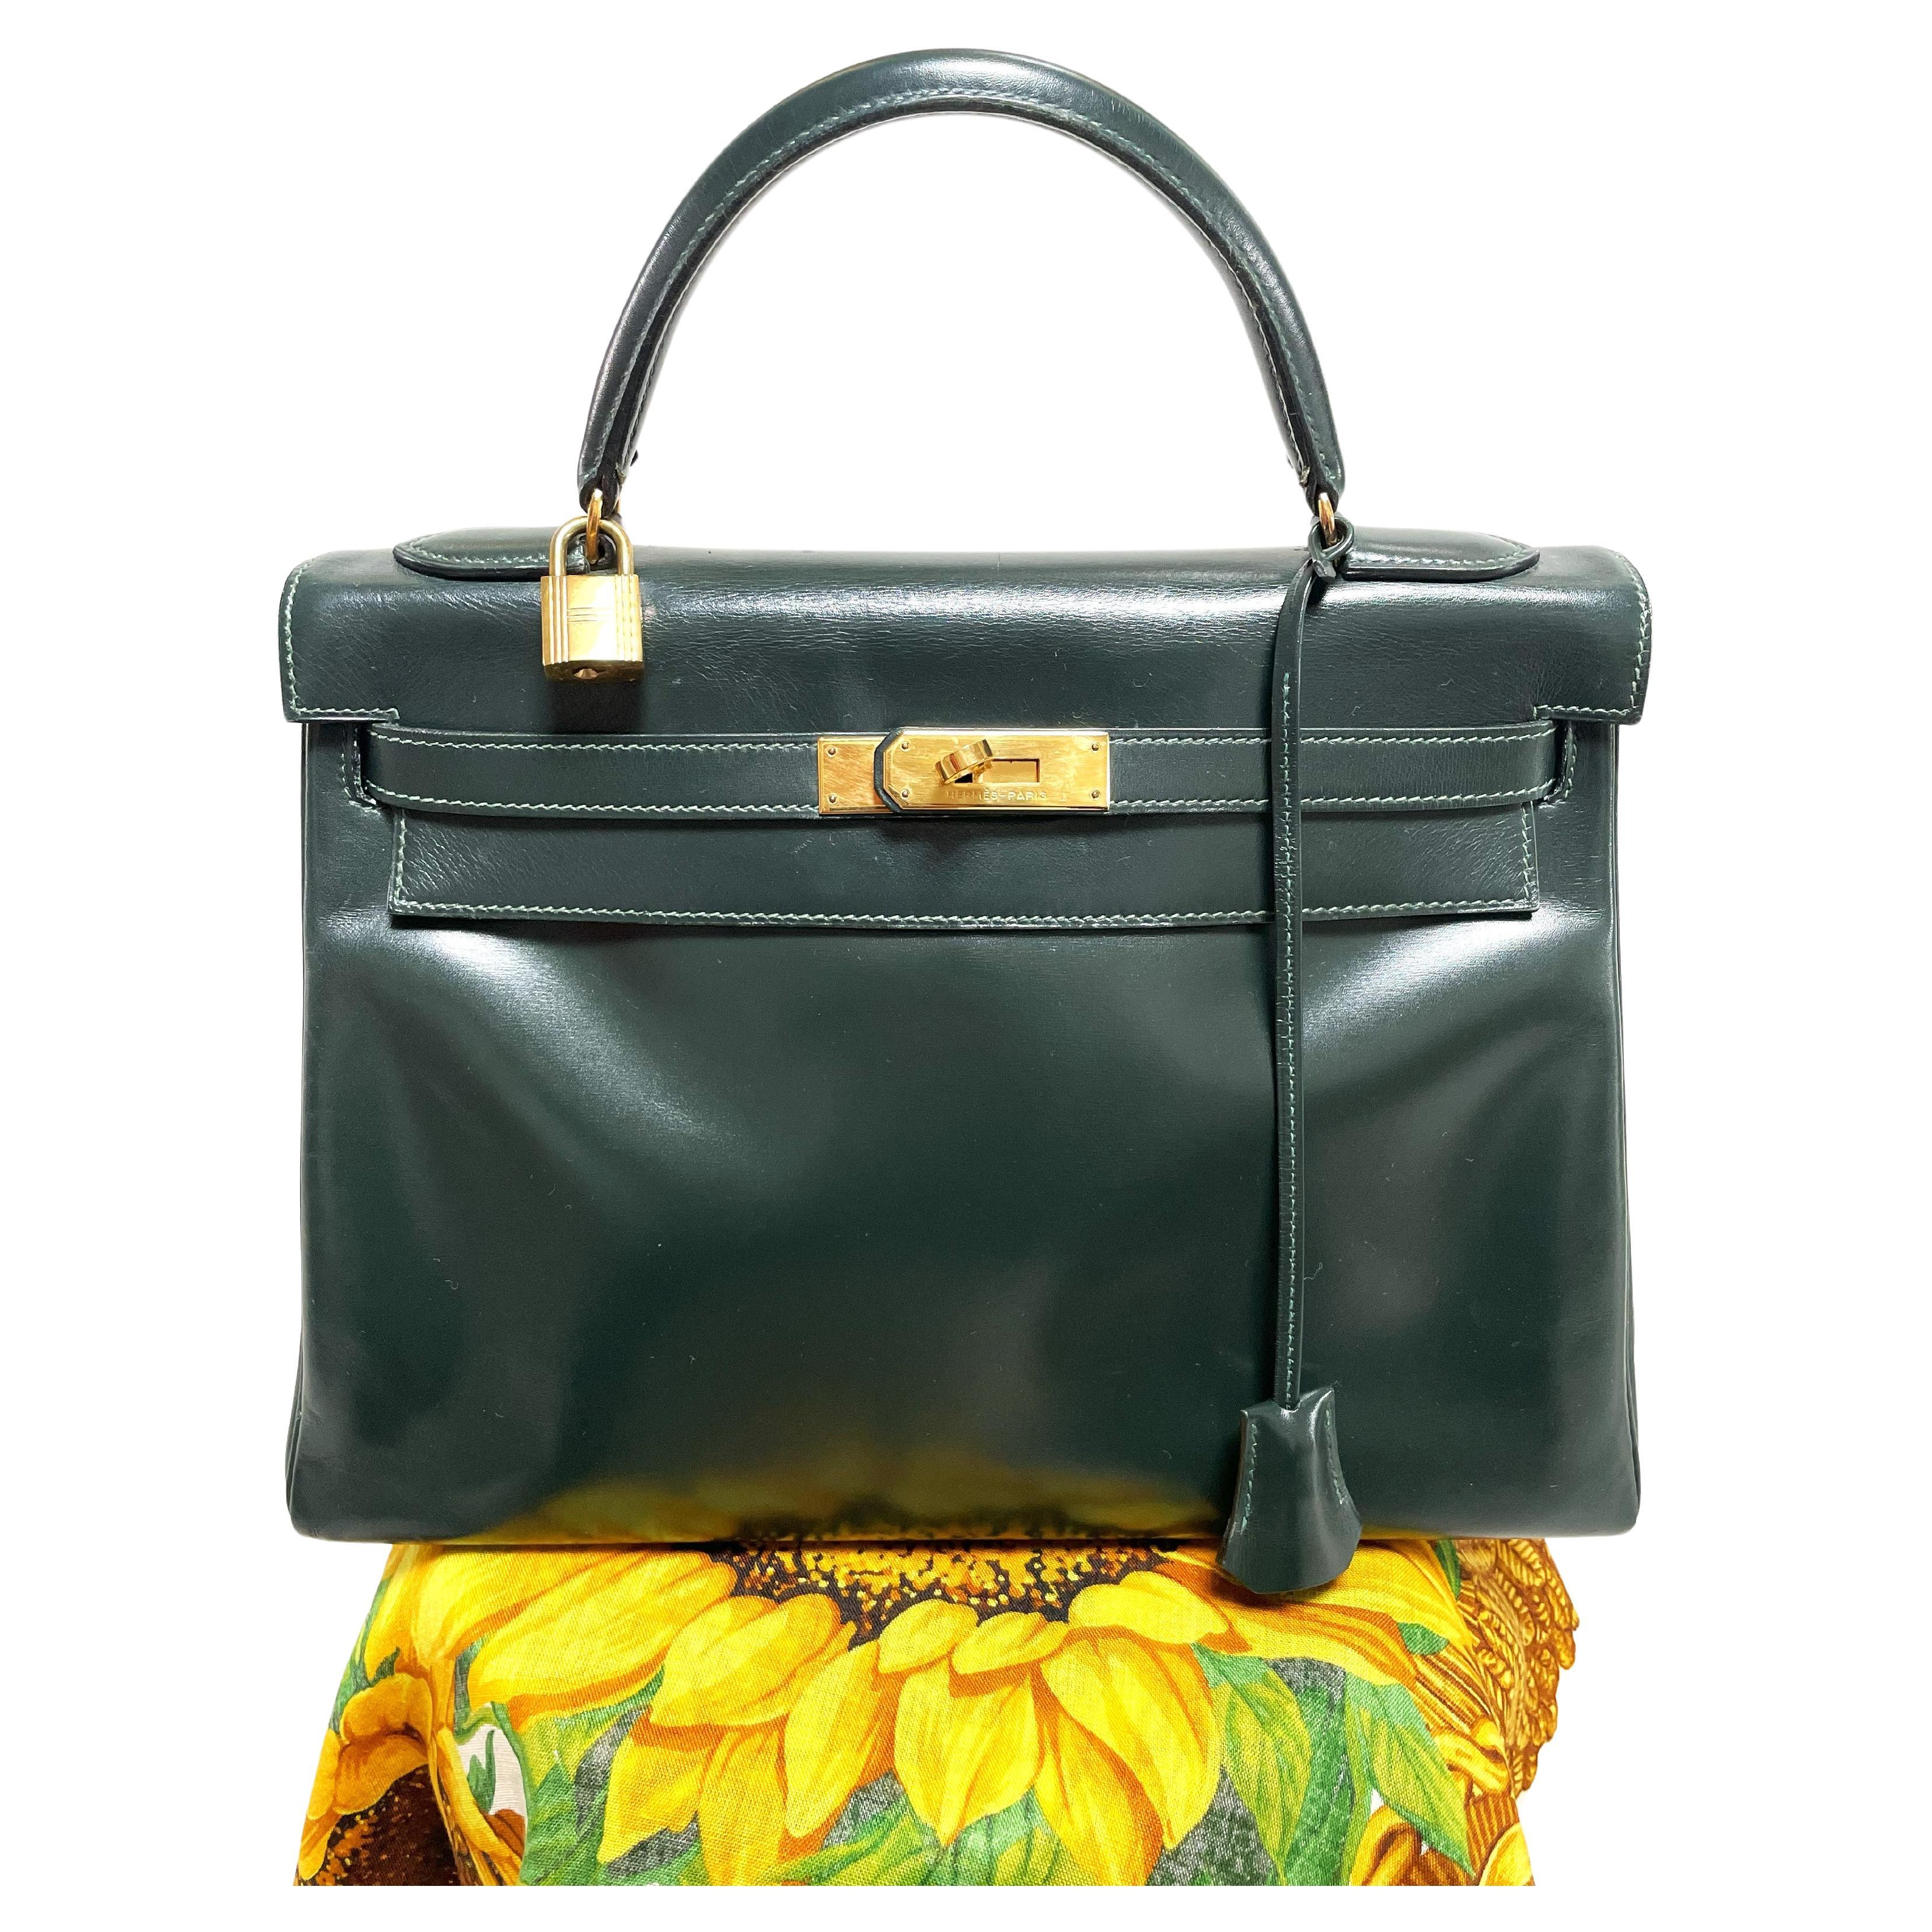 HERMÉS KELLY BAG, (Made in France)  Retourne, 32 cm, Boxcalf ,  Swift vert anglai, S in circel = 1989, gold hardware, coms with original dustbag from this time. 

Dimensions
Hight  22 cm - W  32 cm - D 12 cm 

Features
- Beautiful green box leather